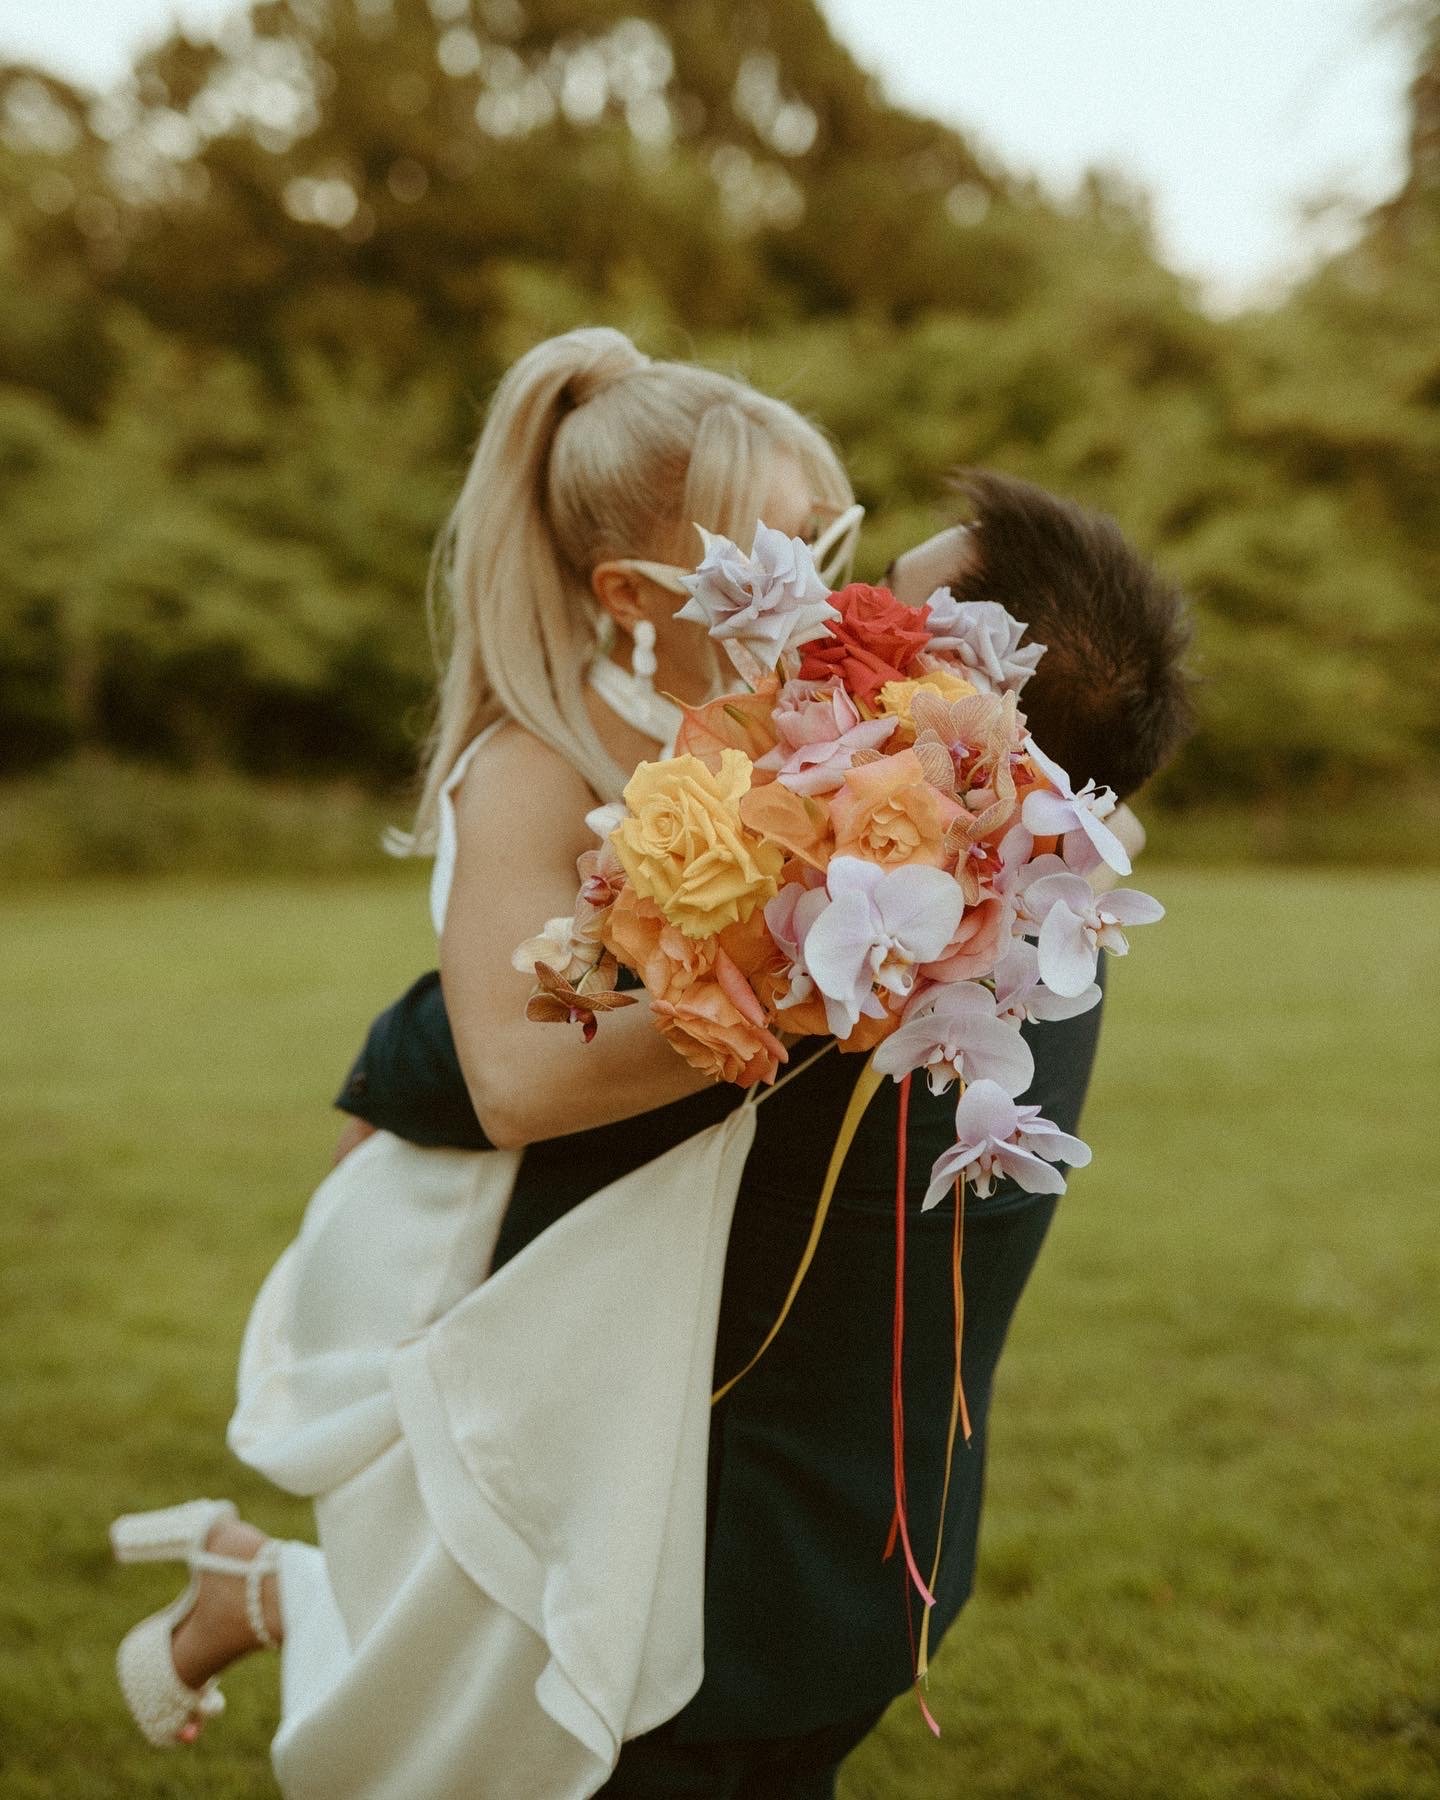  Taken outside the bride is being lifted up by the groom and the couple share a kiss which is discreetly hidden by the brides stunning hand tied bouquet. The large bouquet is made up of lots of large roses in creams, pinks, peach and orange with the 